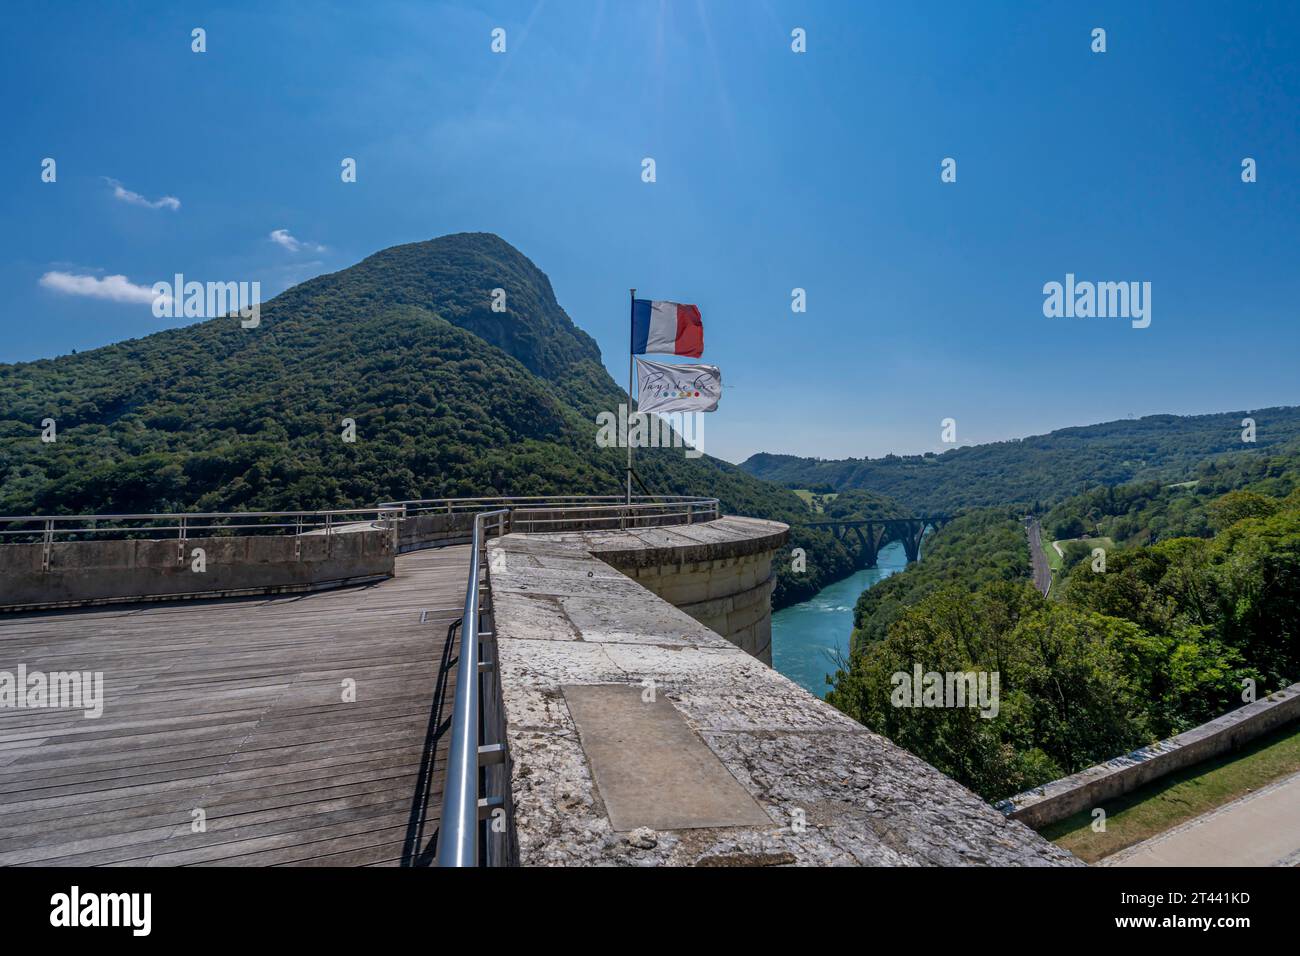 View from the upper fort of French flag and Pays de Gex flag, the Rhone river the Vuache mountain the Longeray Viaduct and a railway track Stock Photo